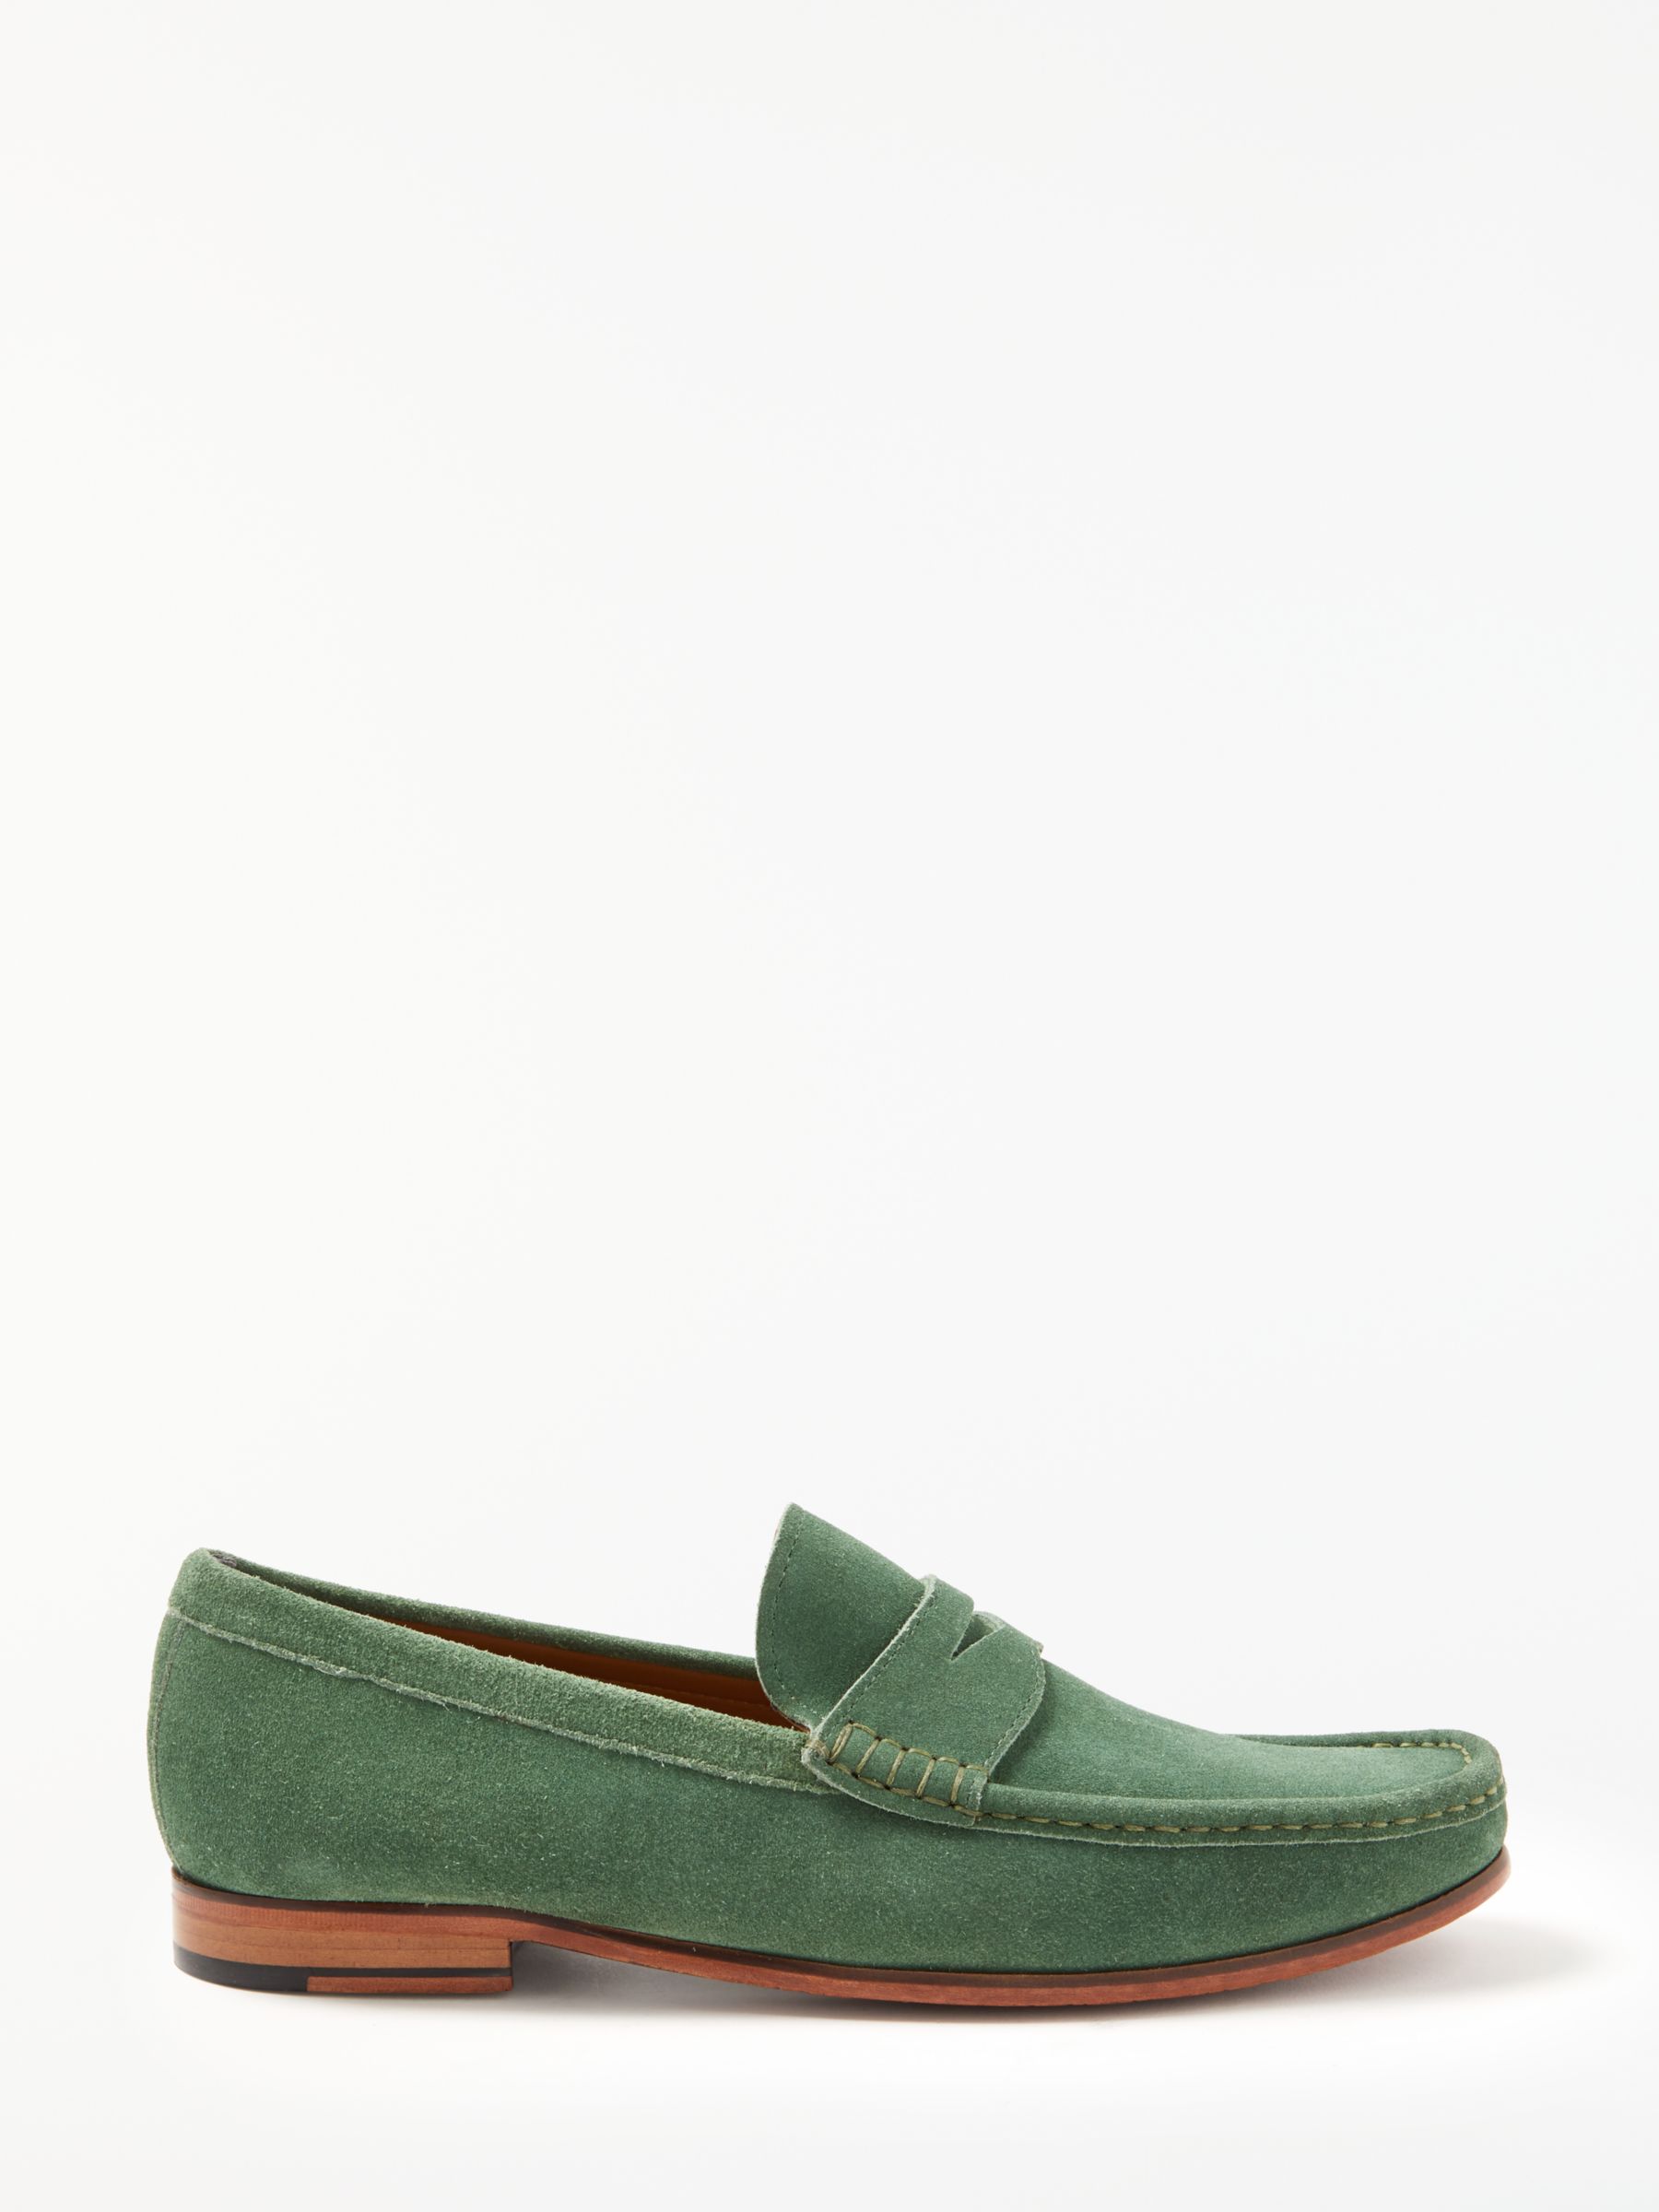 John Lewis & Partners Louis Suede Penny Loafers, Green, 7